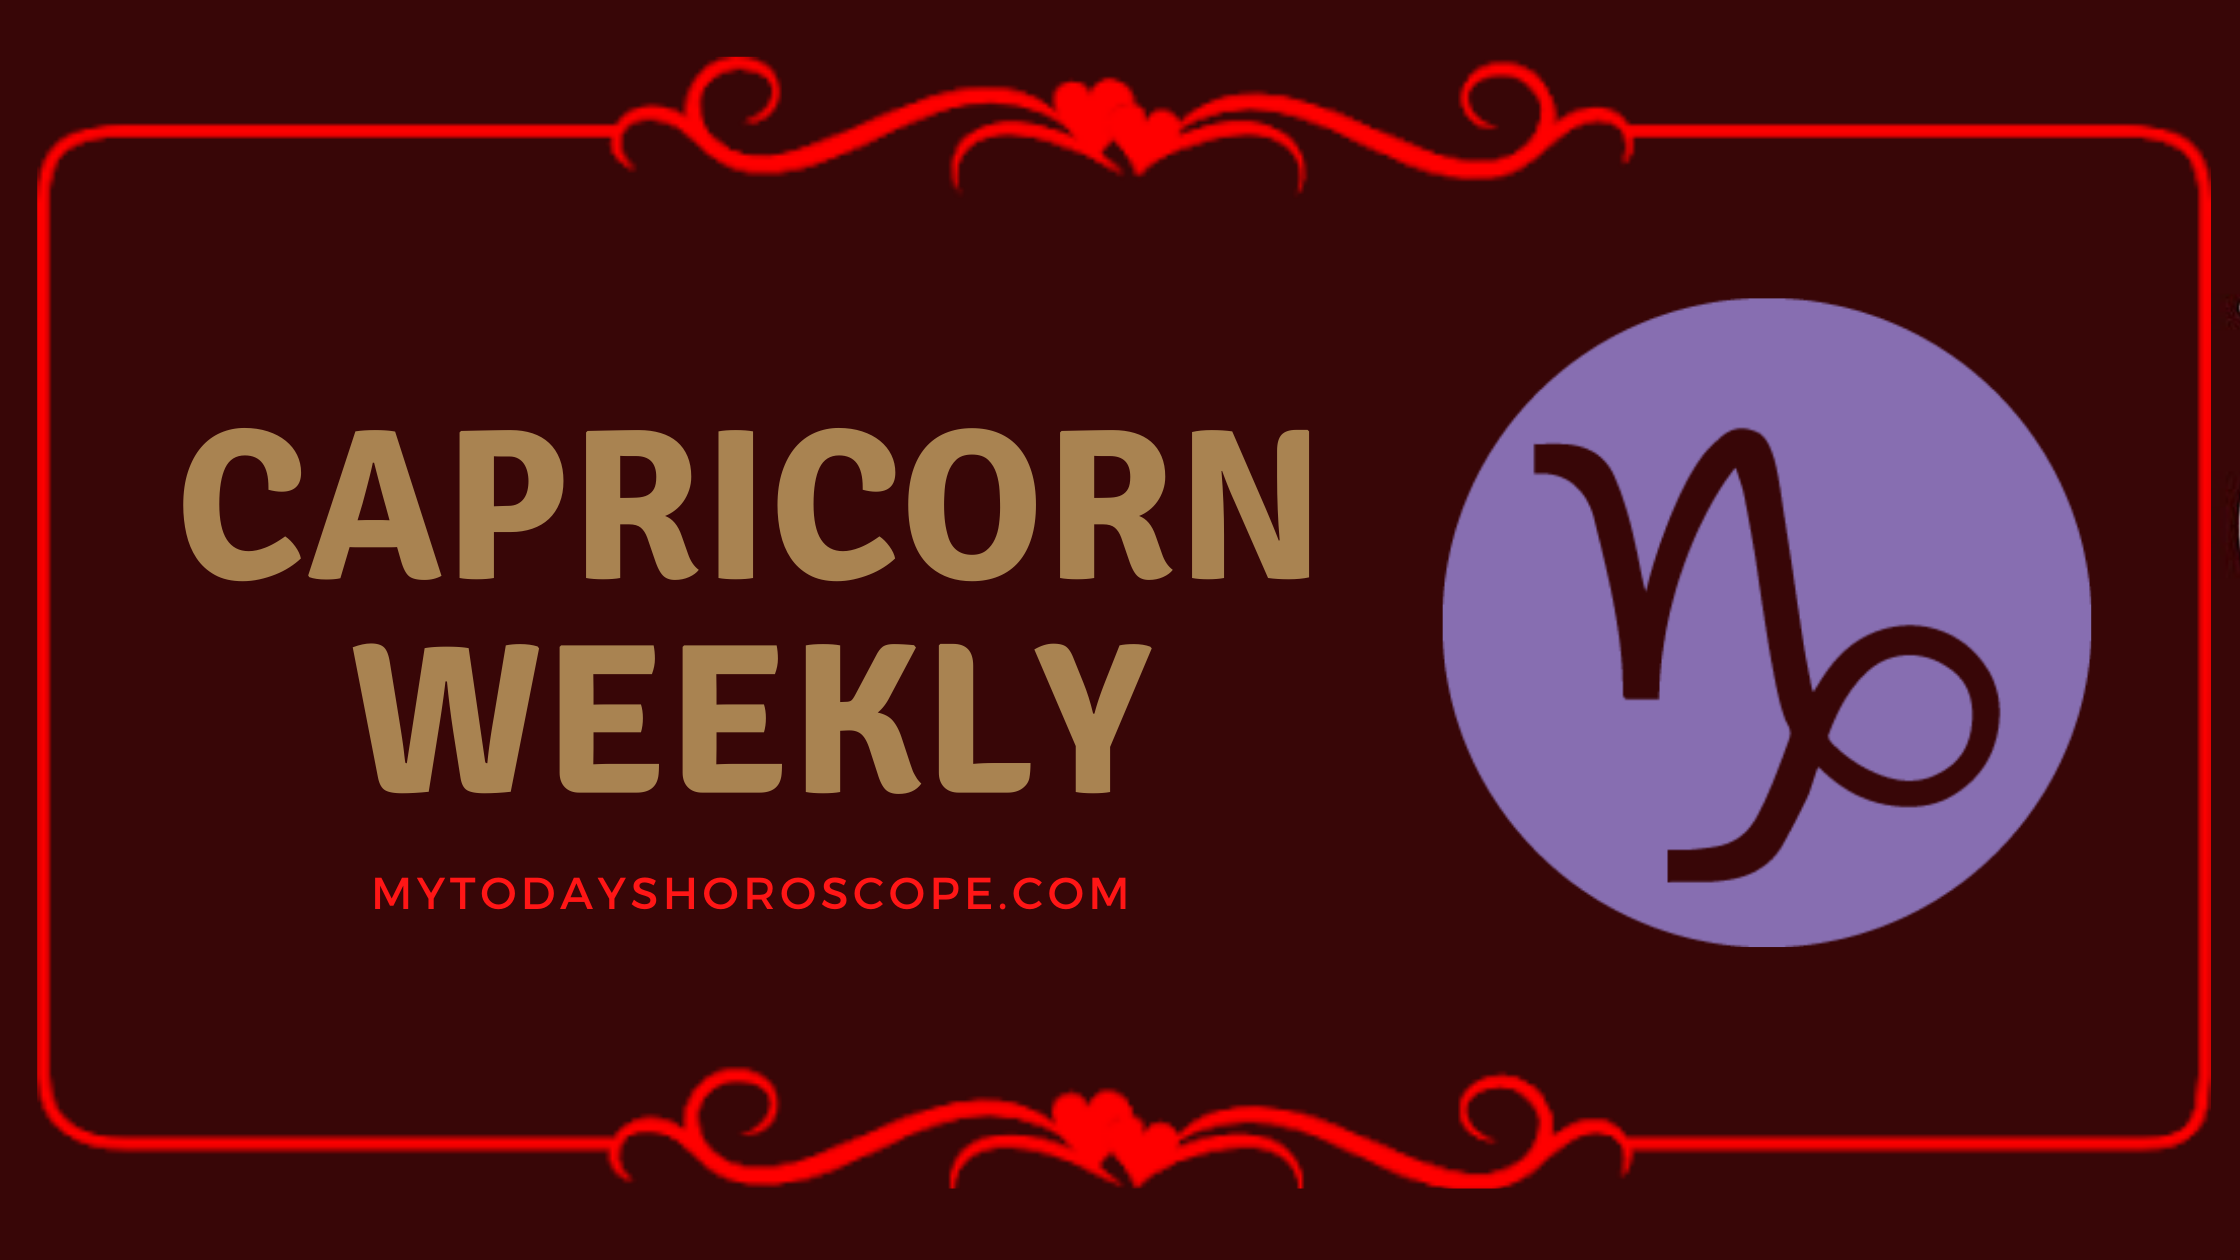 Capricorn Weekly Horoscope for Love, Work and Well-being